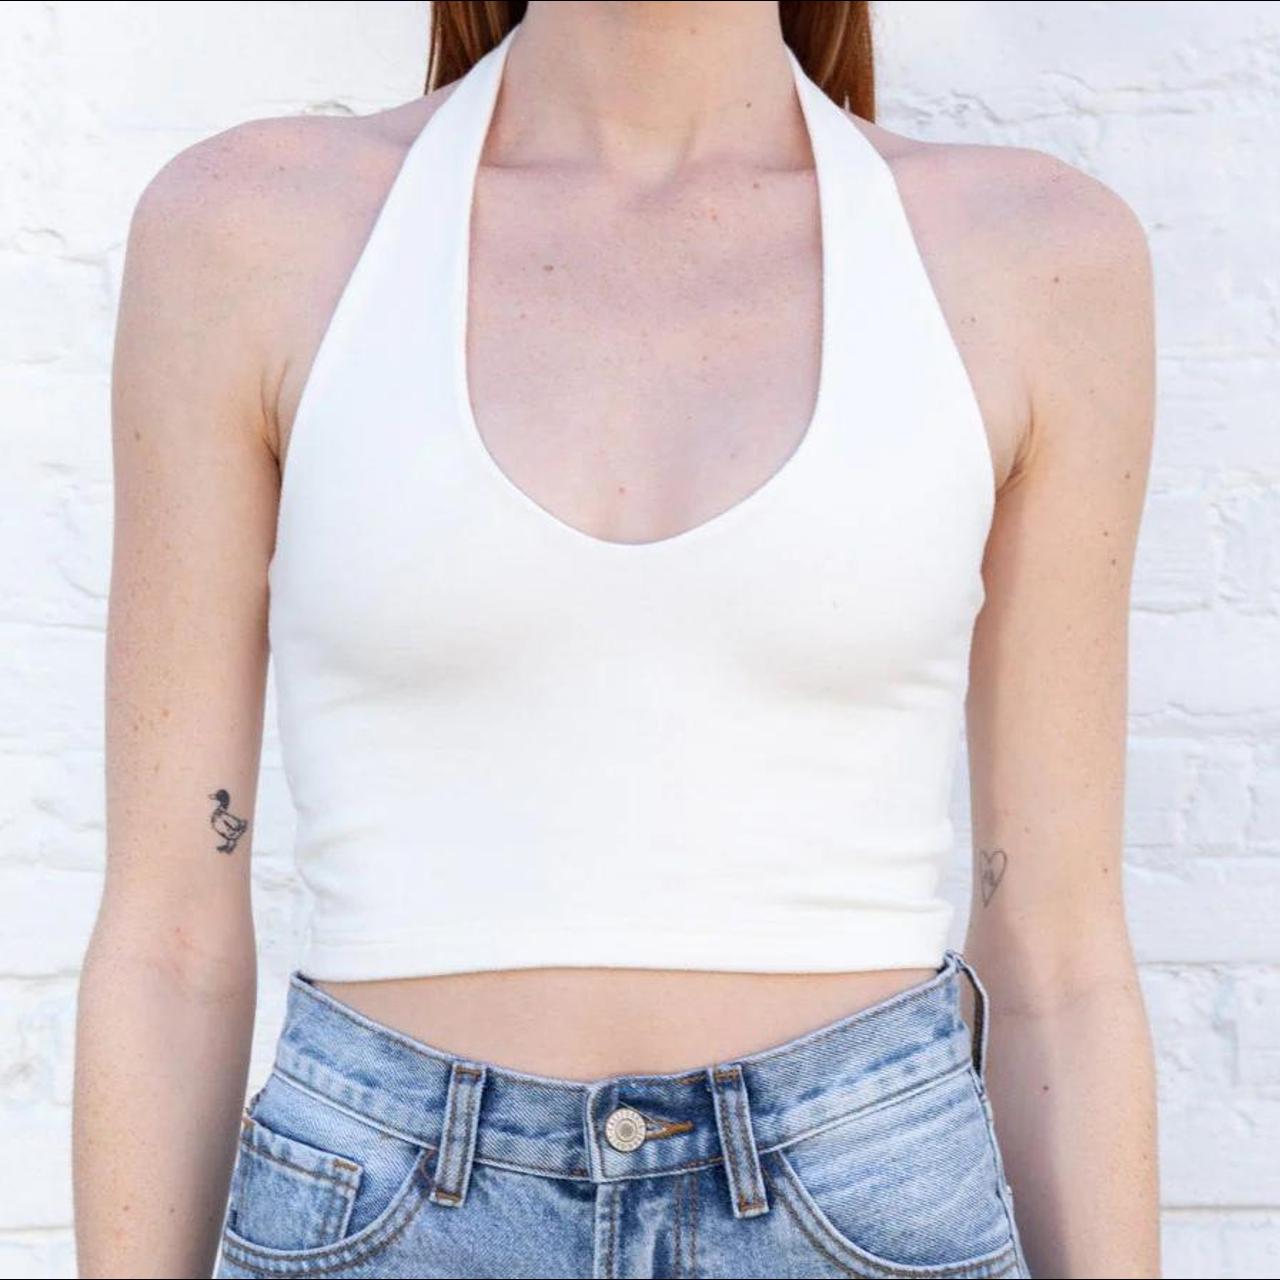 the alexis halter crop top from brandy melville (i had an unused